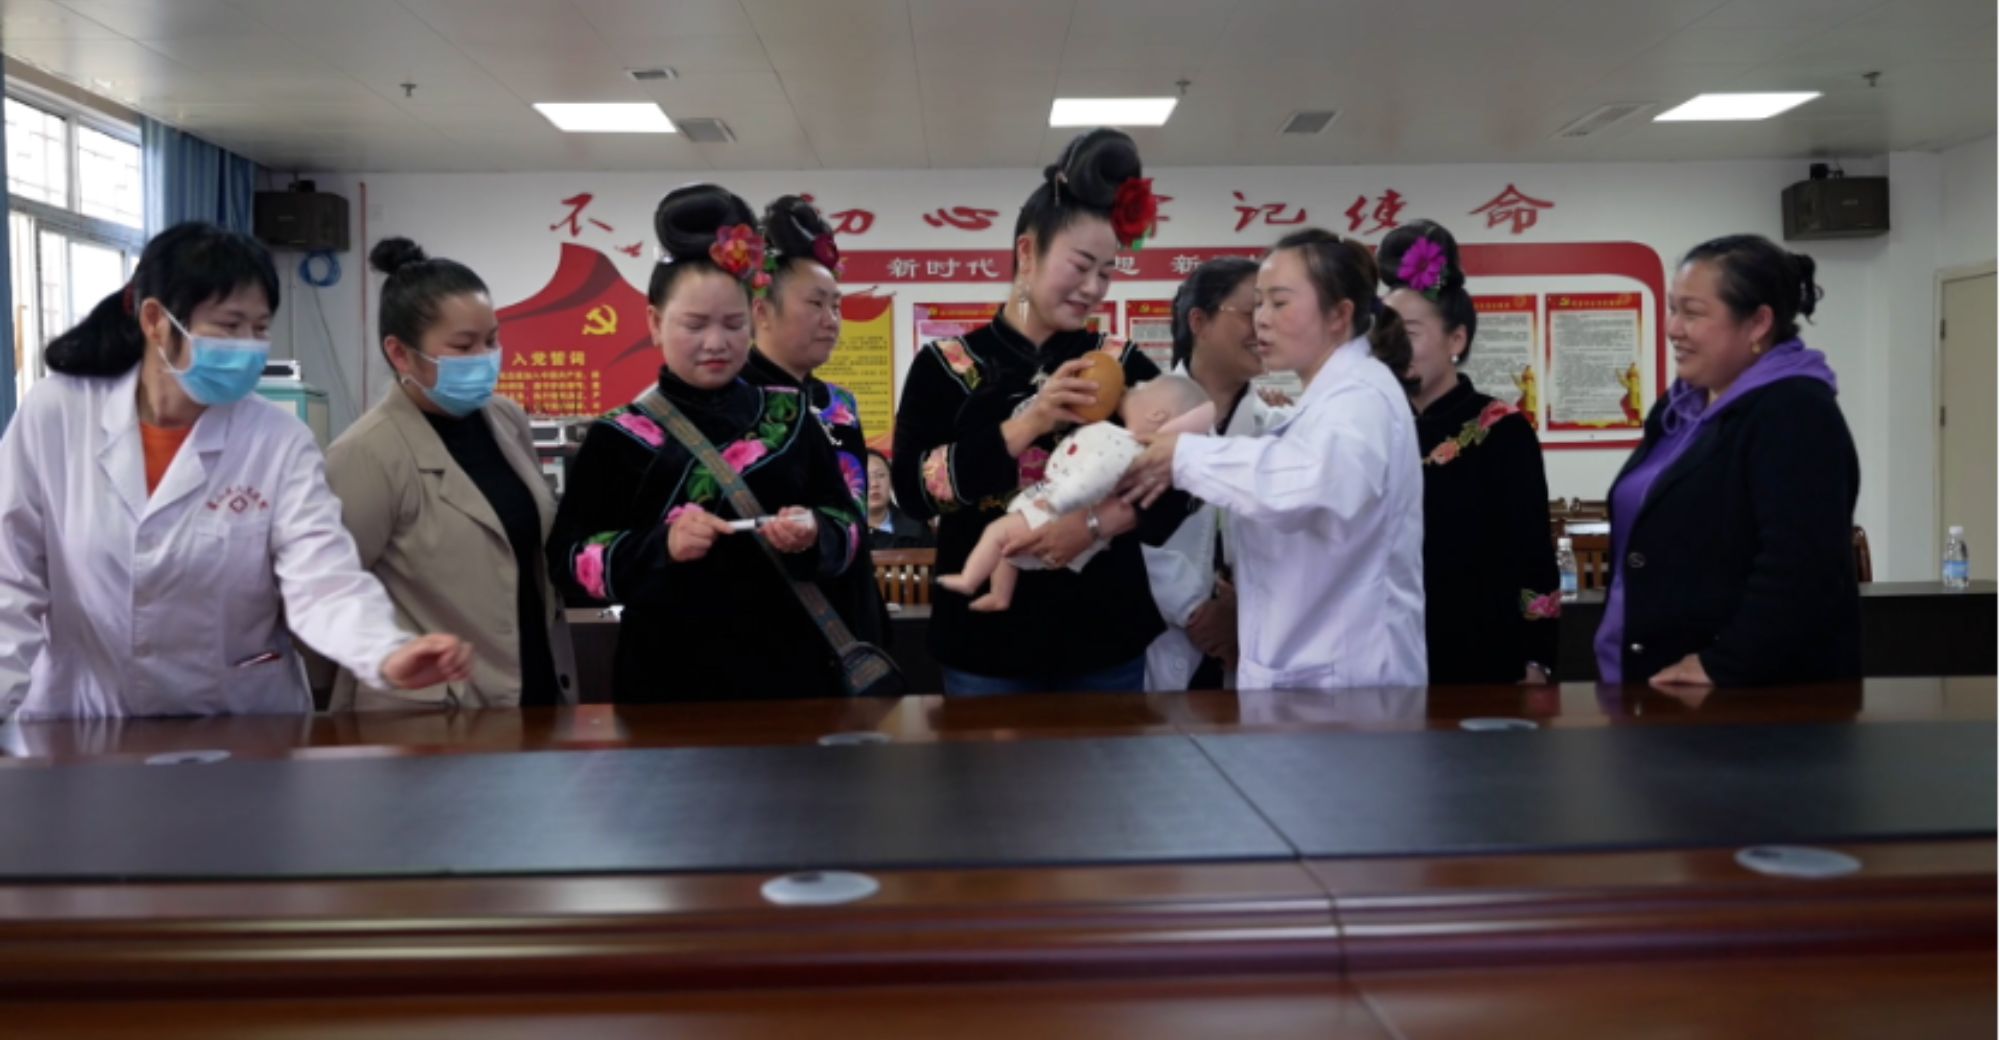 Alibaba-backed Charitable Program Benefits 630K Women of Reproductive Age in Four Years